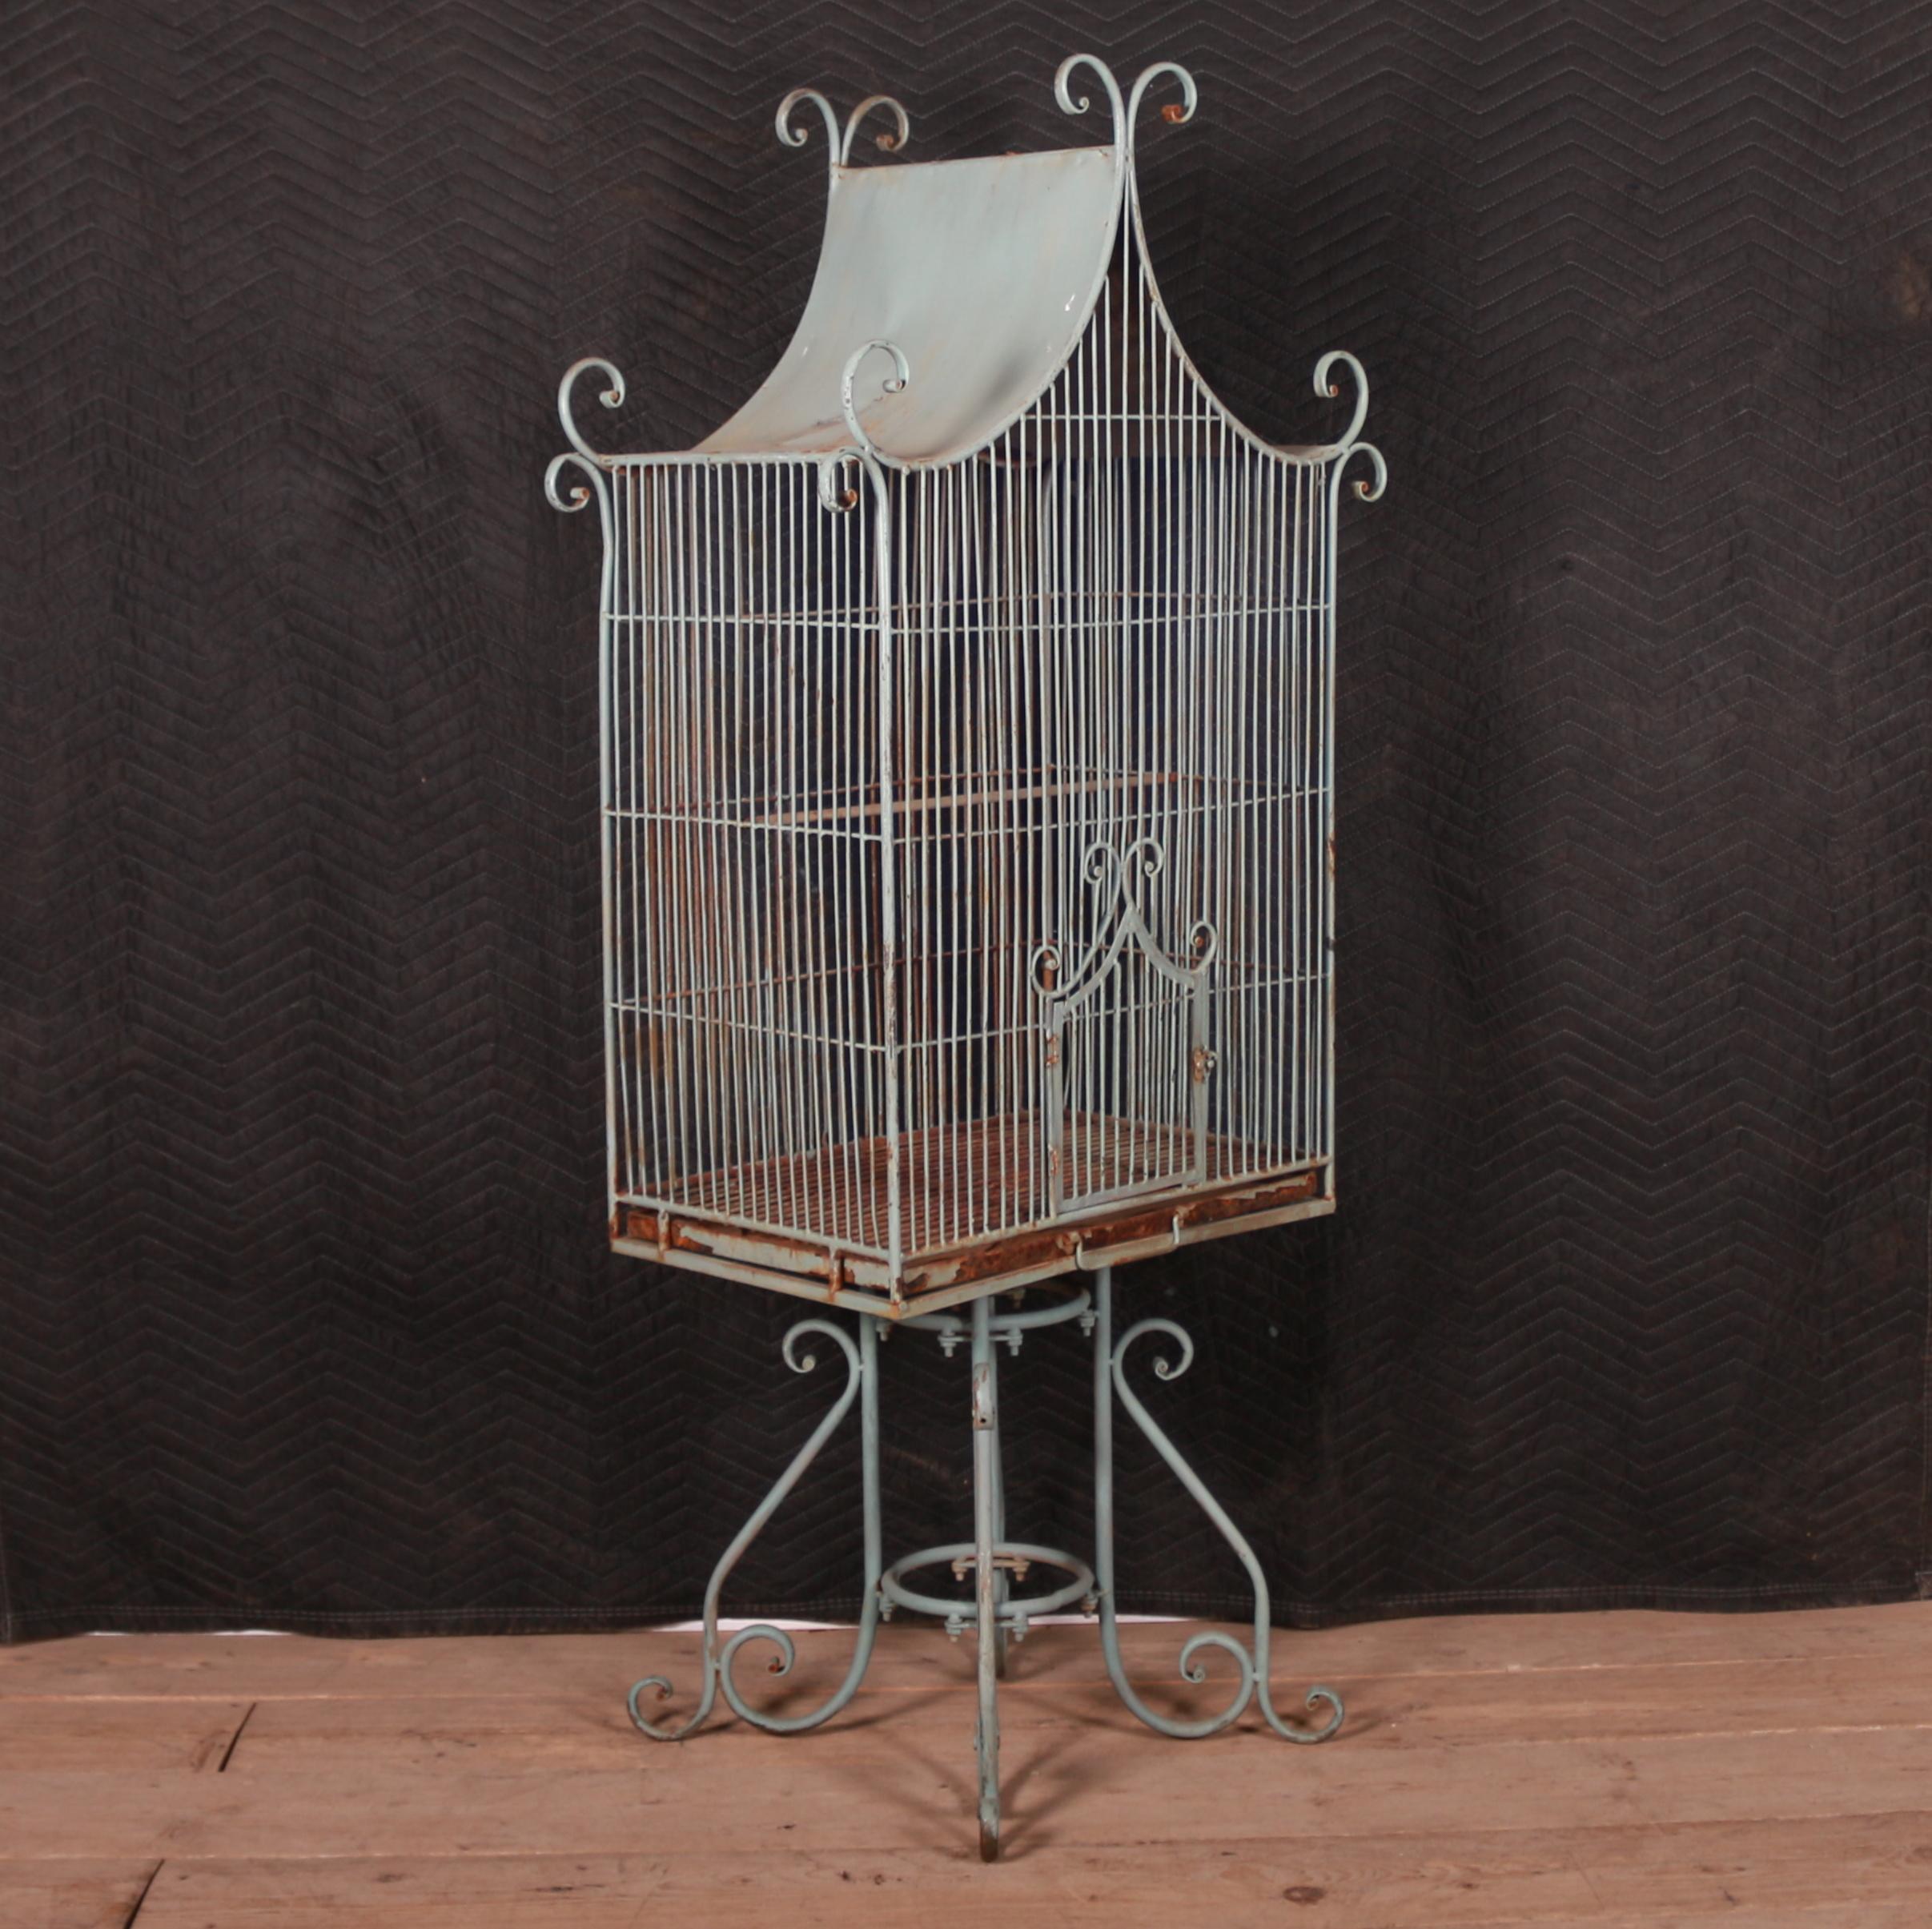 Interesting early 20th C French bird cage on stand. 1930.

Reference: 7438

Dimensions
29 inches (74 cms) Wide
20.5 inches (52 cms) Deep
64 inches (163 cms) High.